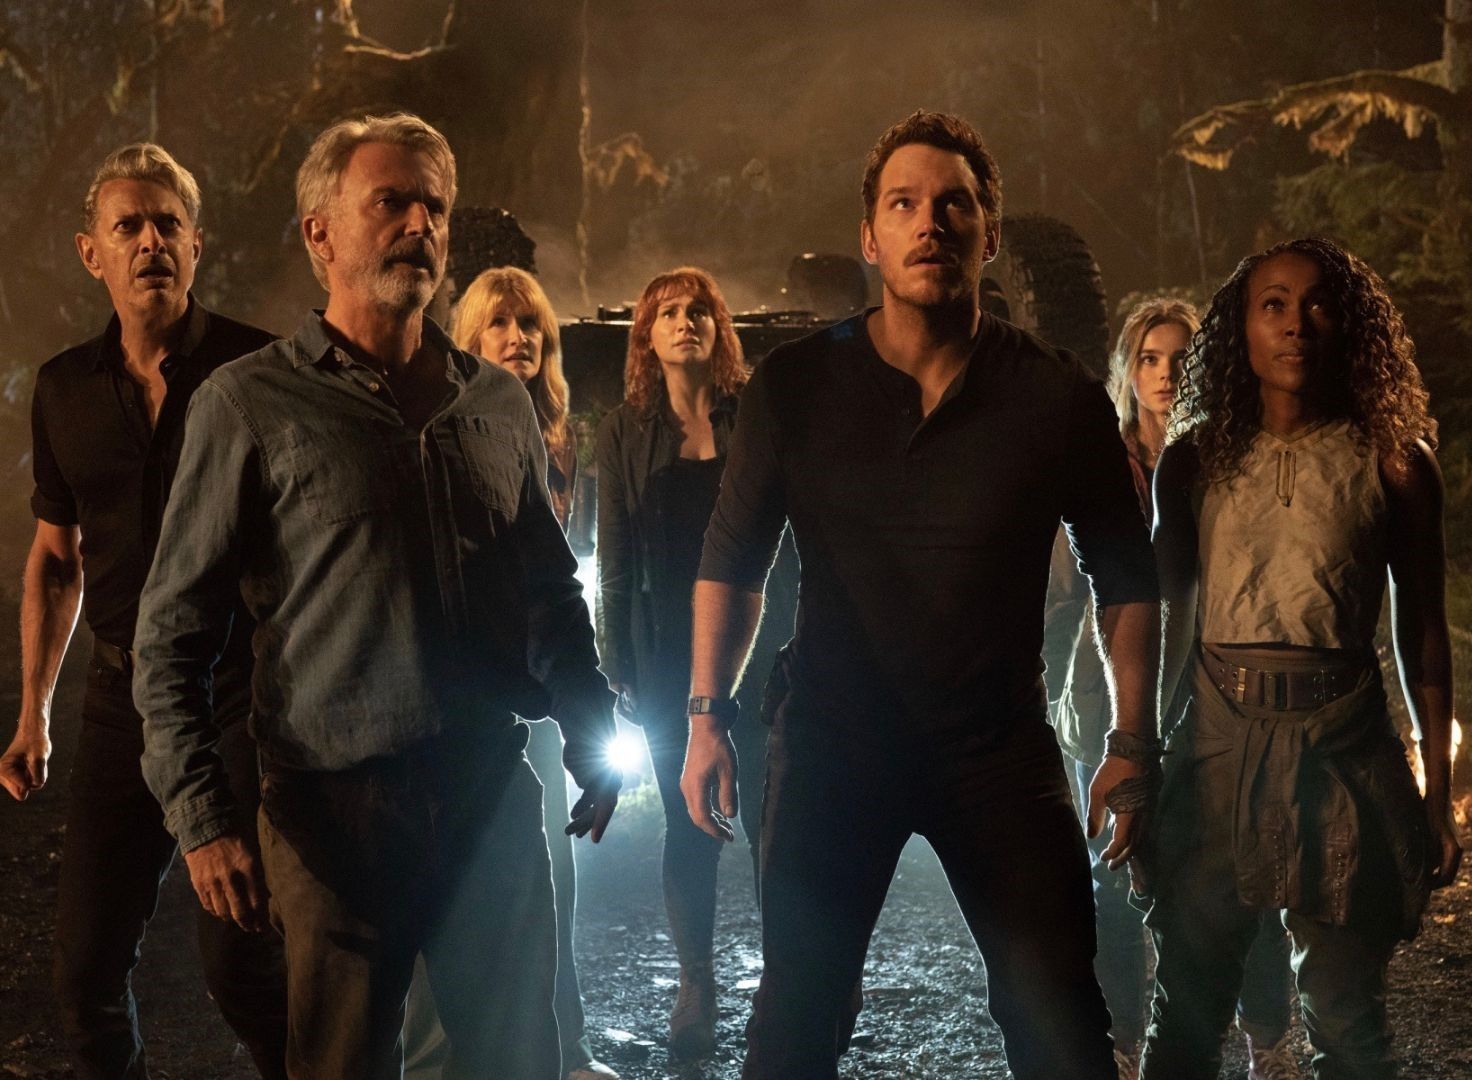 New dinosaurs, old friends: 'Jurassic World Dominion' review